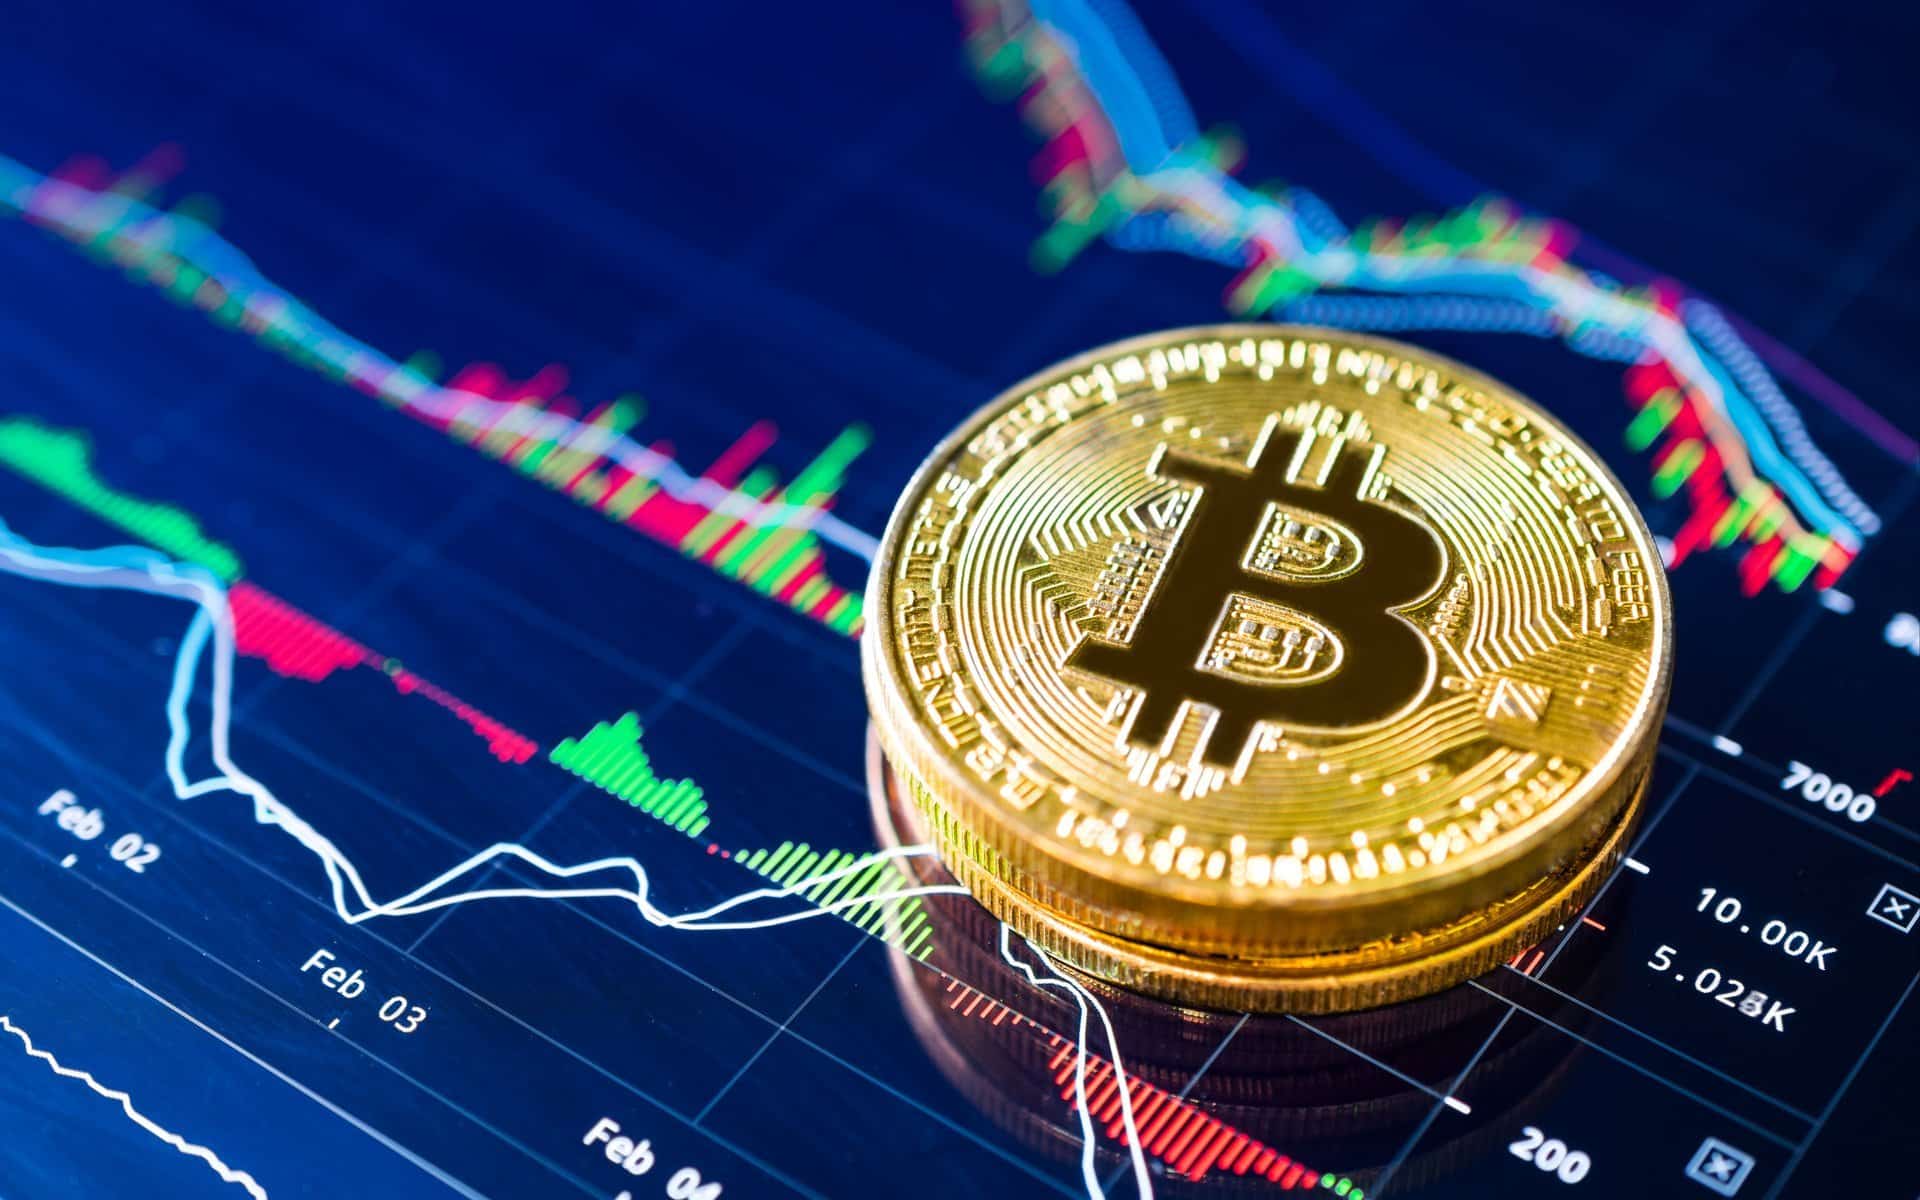 Bitcoin (BTC) is likely to hit $60K